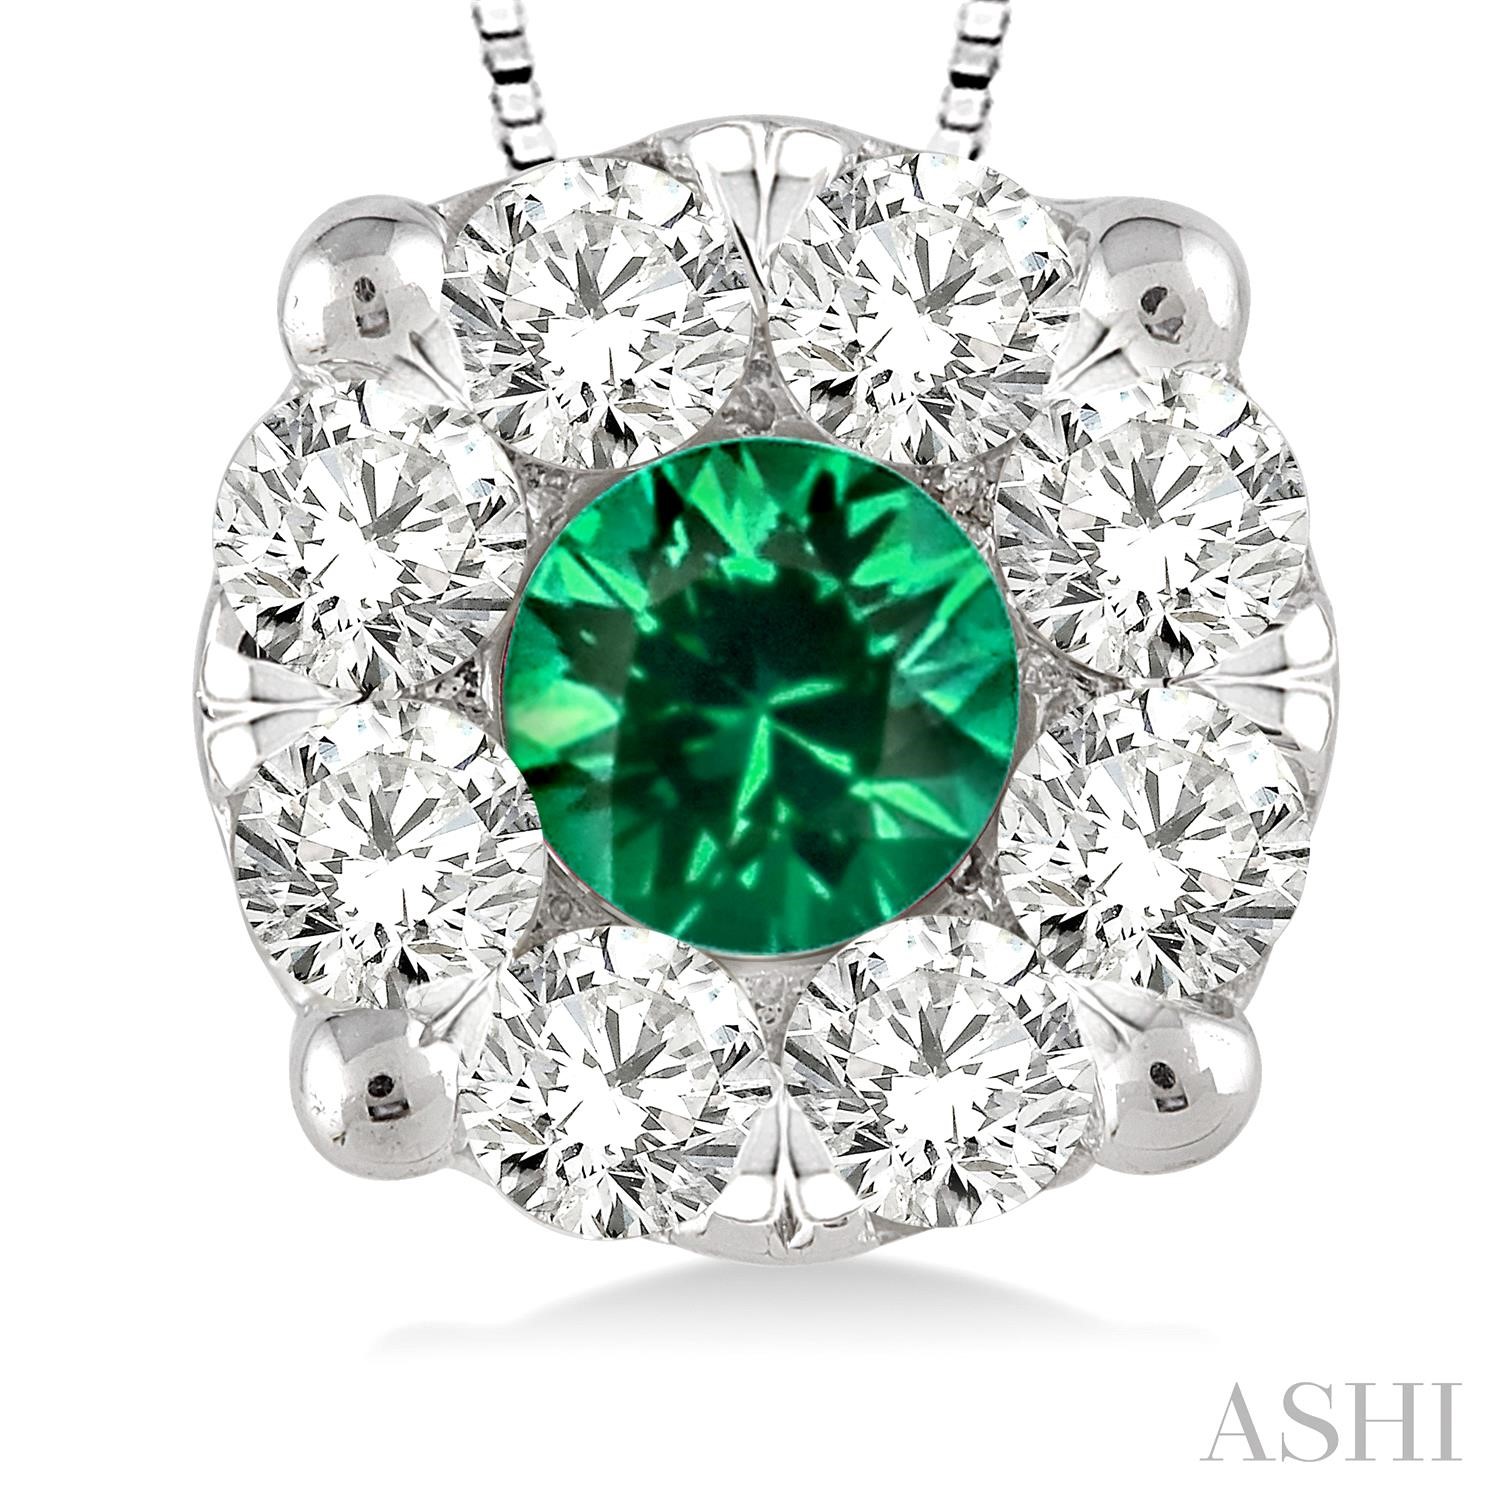 Lovebright Gemstone & Diamond Pendant
3.8 mm Round Cut Emerald and 1/3 Ctw Lovebright Pendant in 14K White Gold with Chain